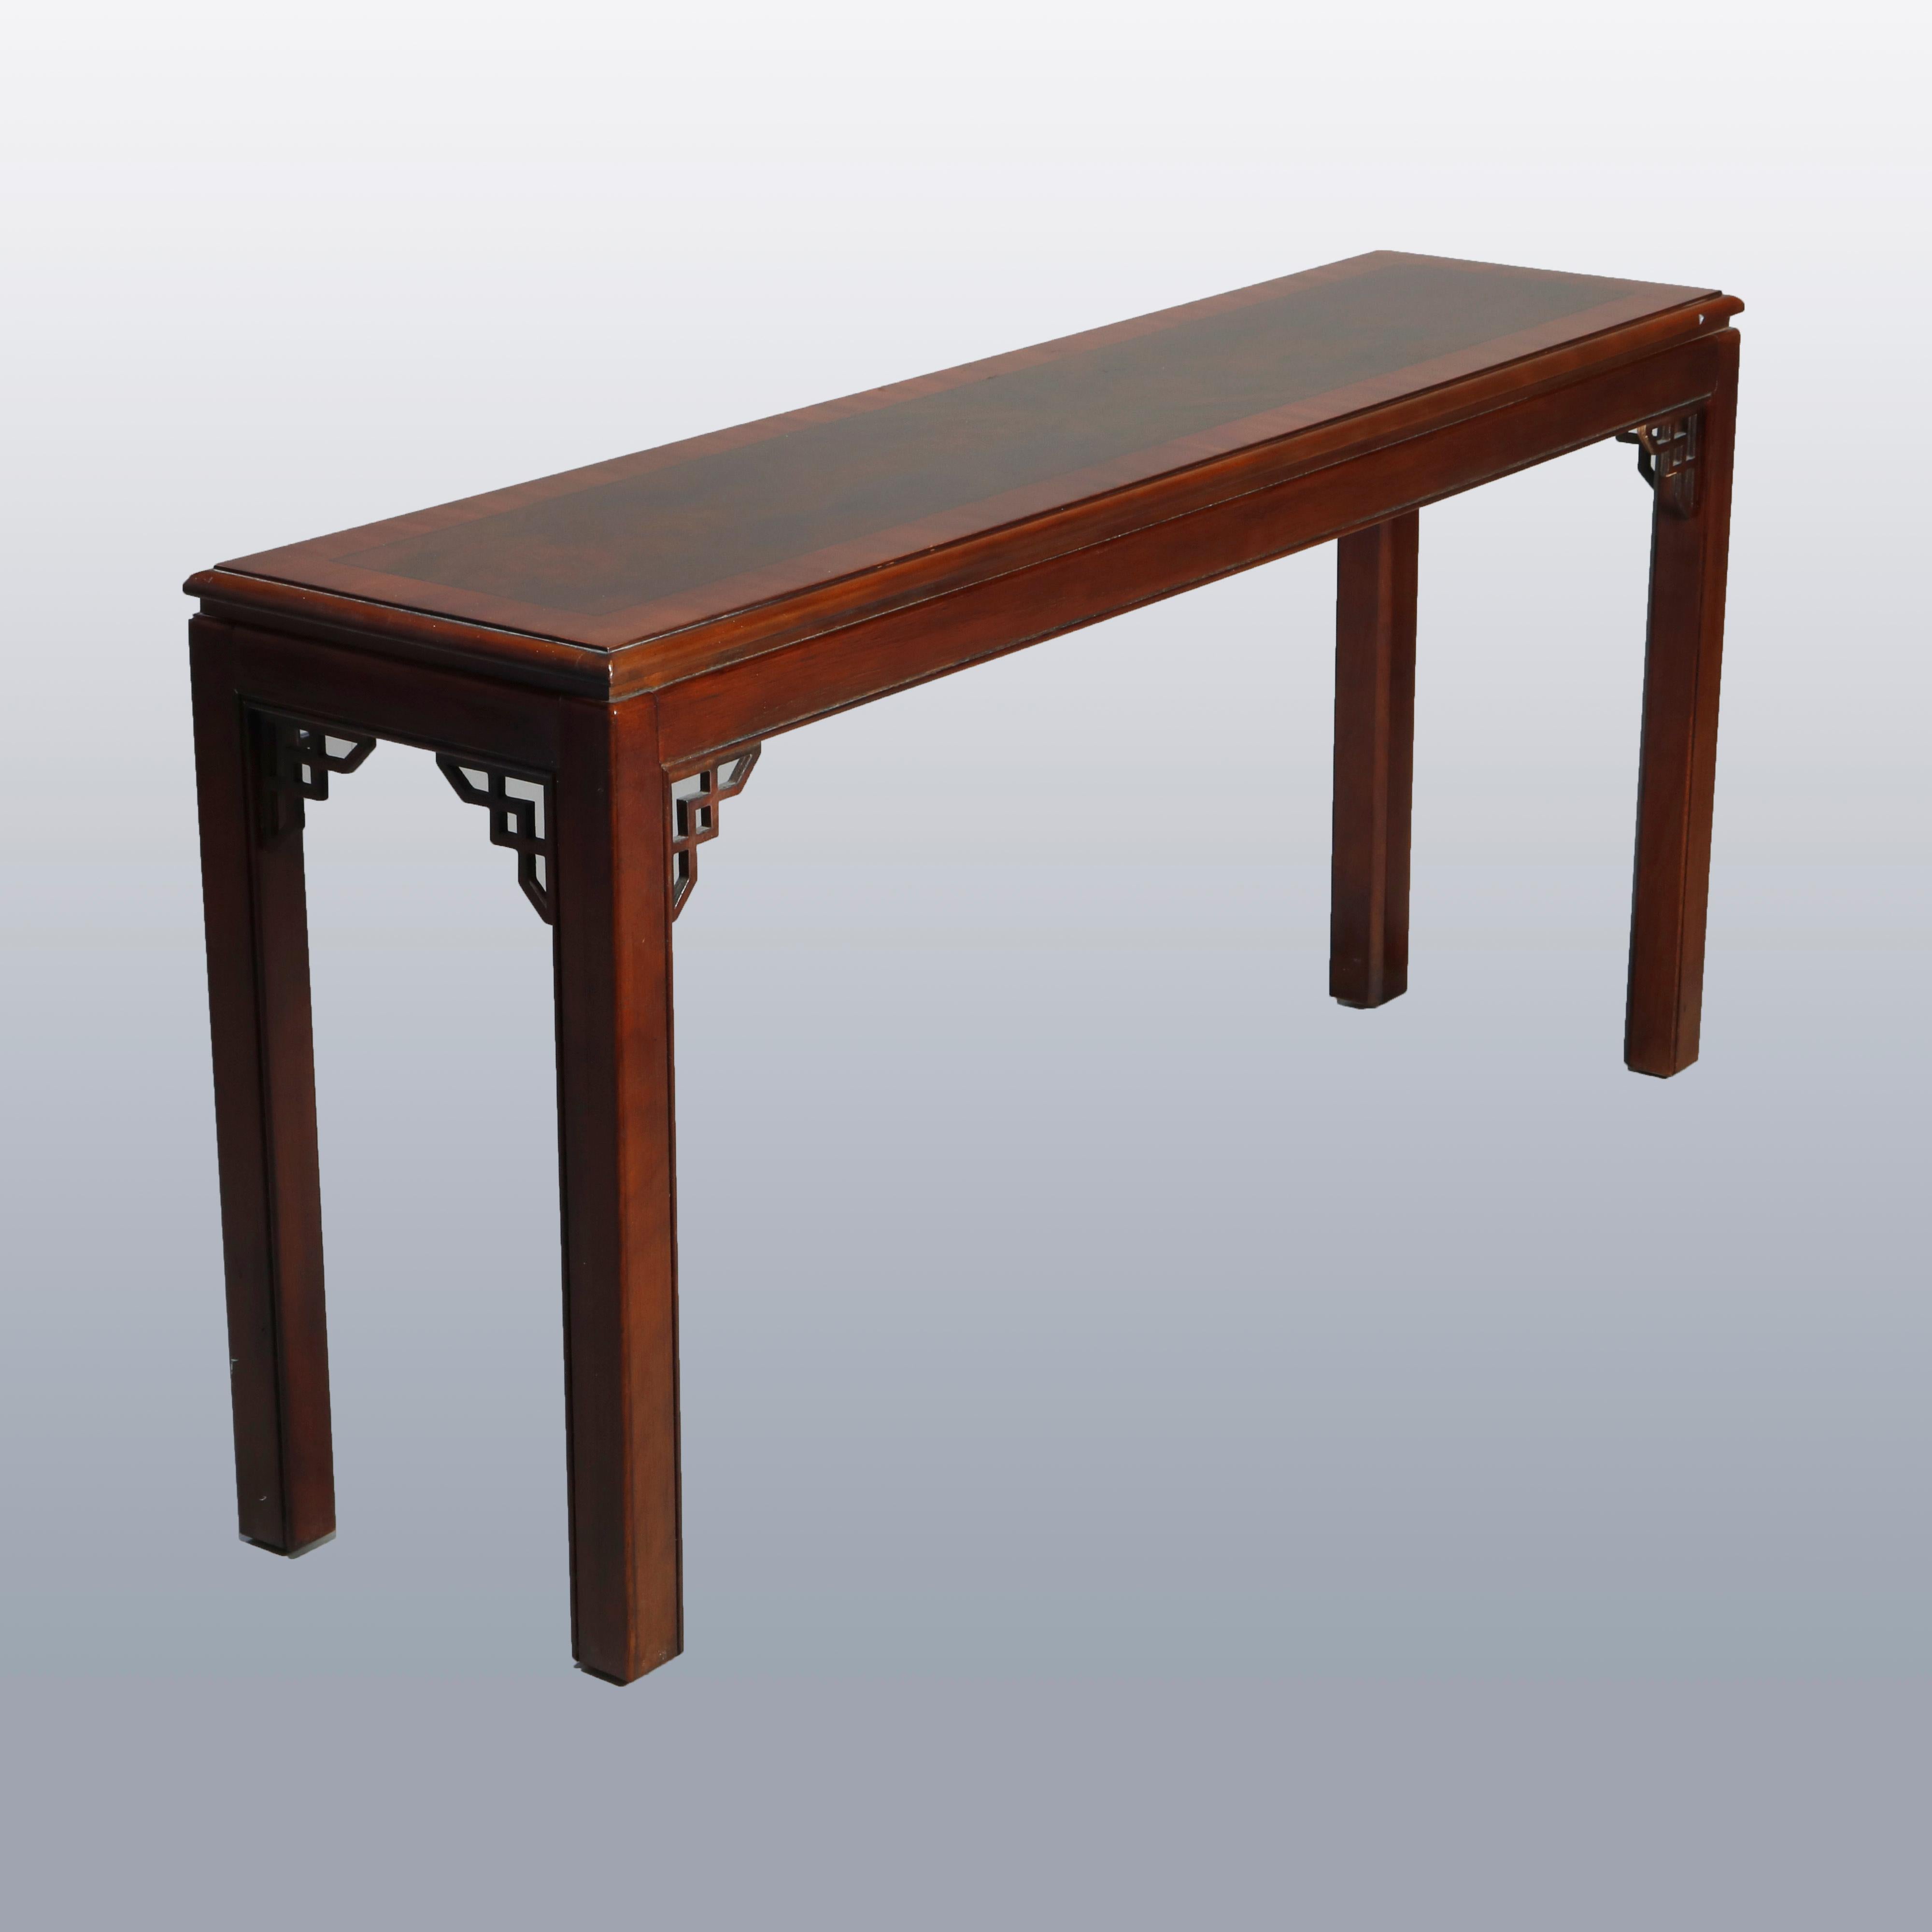 Burl Antique Chinese Chippendale Mahogany Crossbanded Console Table by Drexel, 20th C